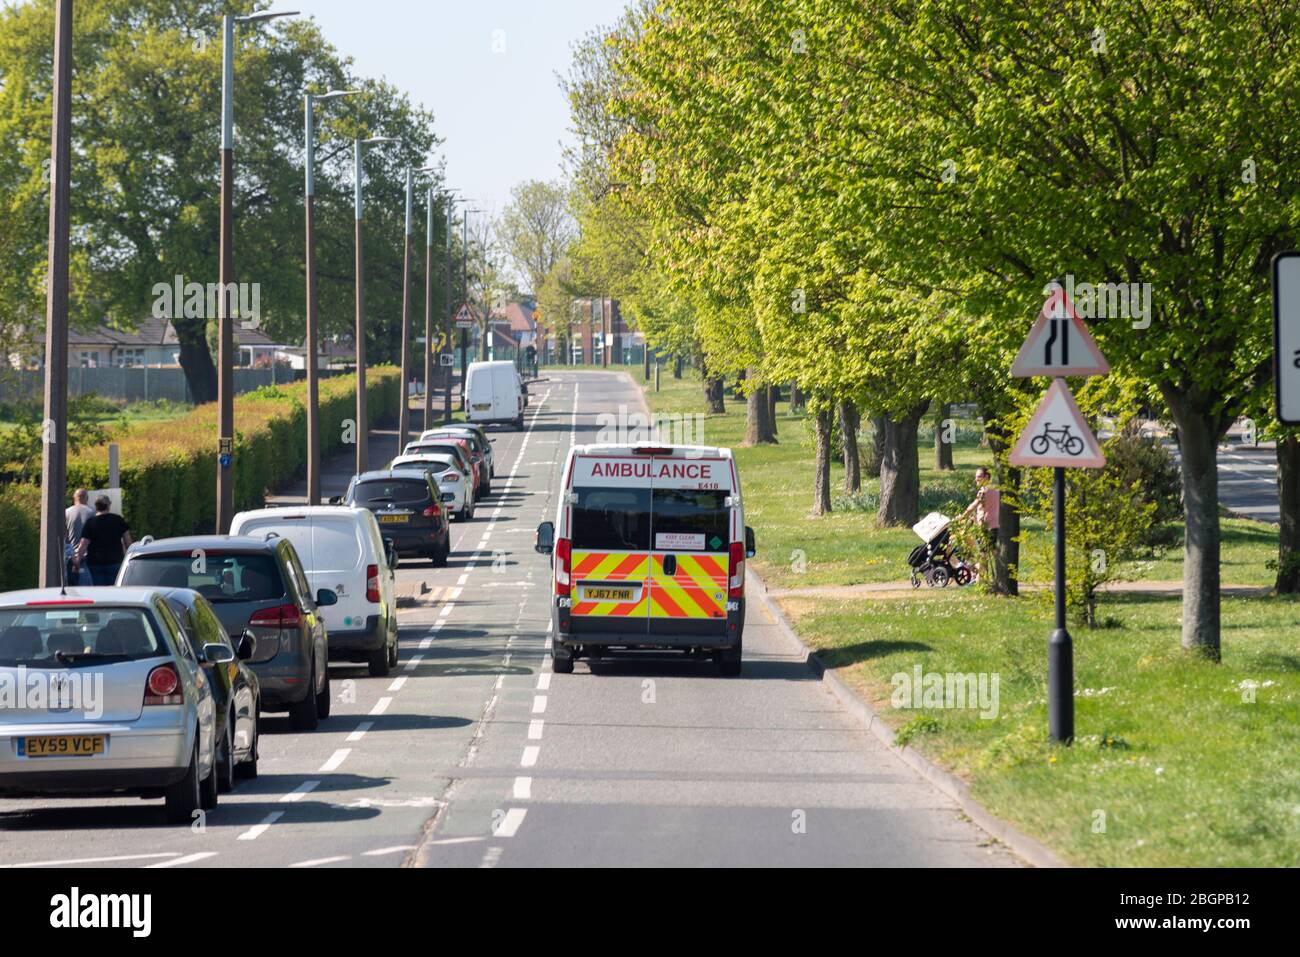 Ambulance on Prittlewell Chase heading to Southend Hospital COVID-19 Coronavirus pandemic lockdown period in Westcliff, Southend on Sea, Essex, UK Stock Photo